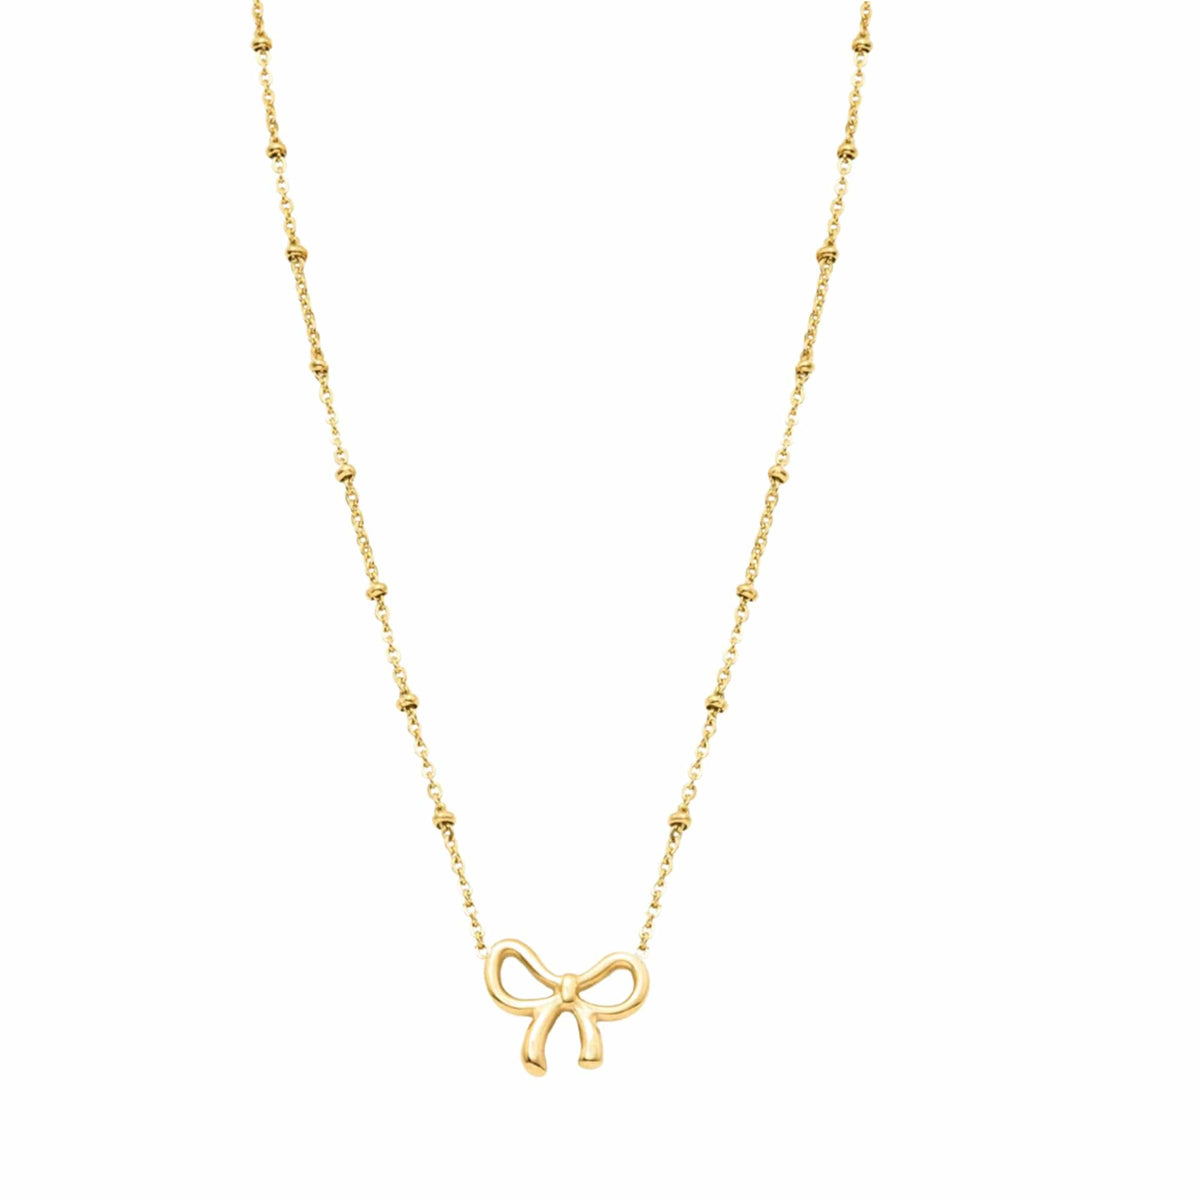 BohoMoon Stainless Steel Lyla Bow Necklace Gold